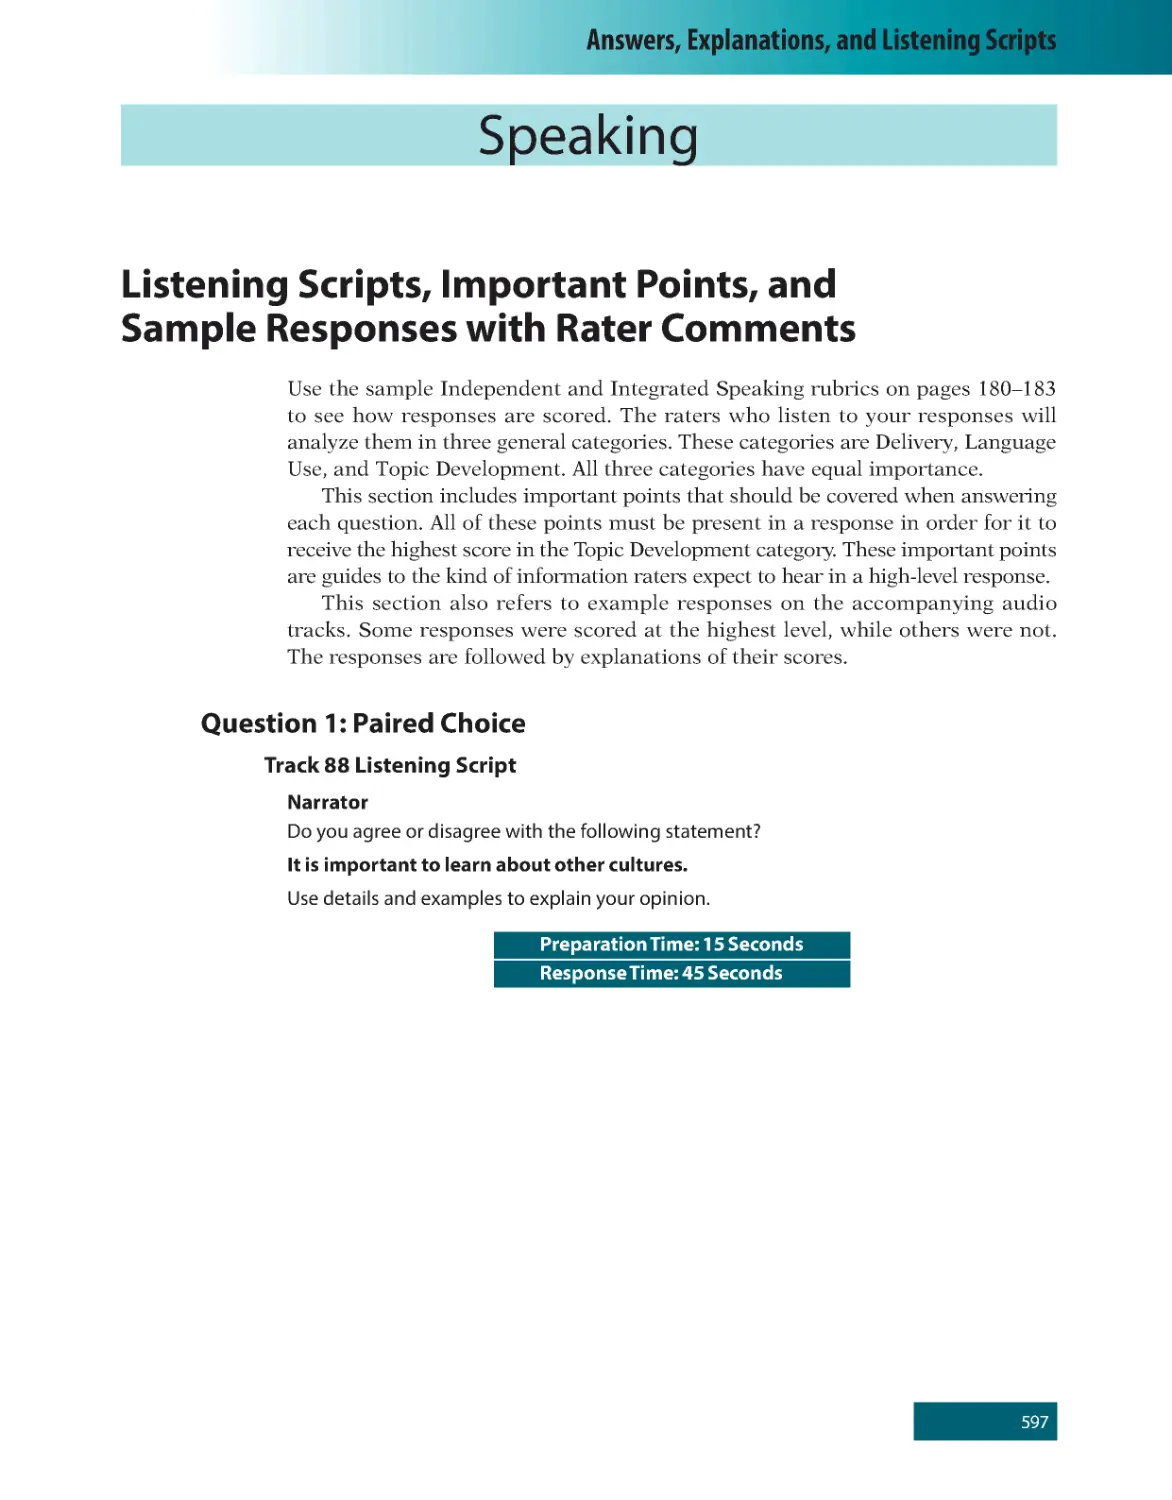 Speaking
Listening Scripts, Important Points, and Sample Responses with Rater Comments